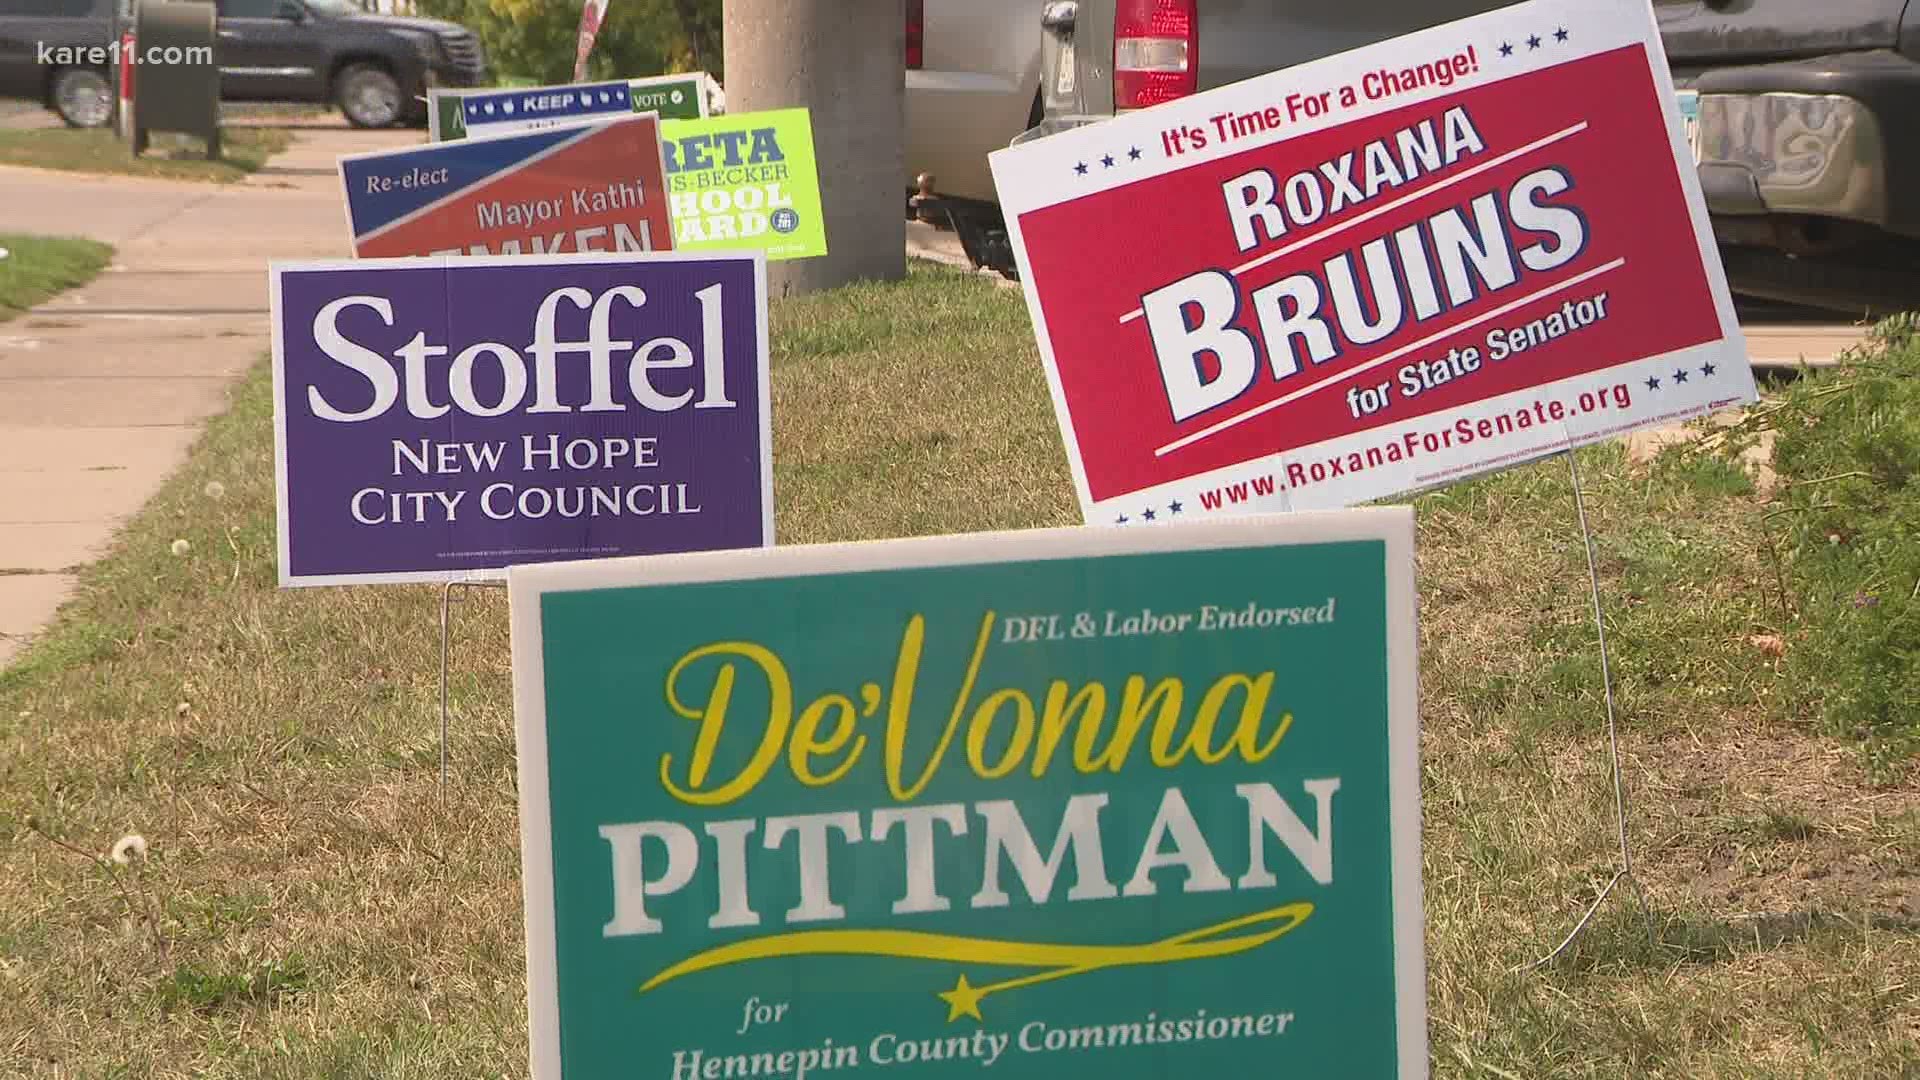 Columbia University study says yard signs work, but less than you might expect